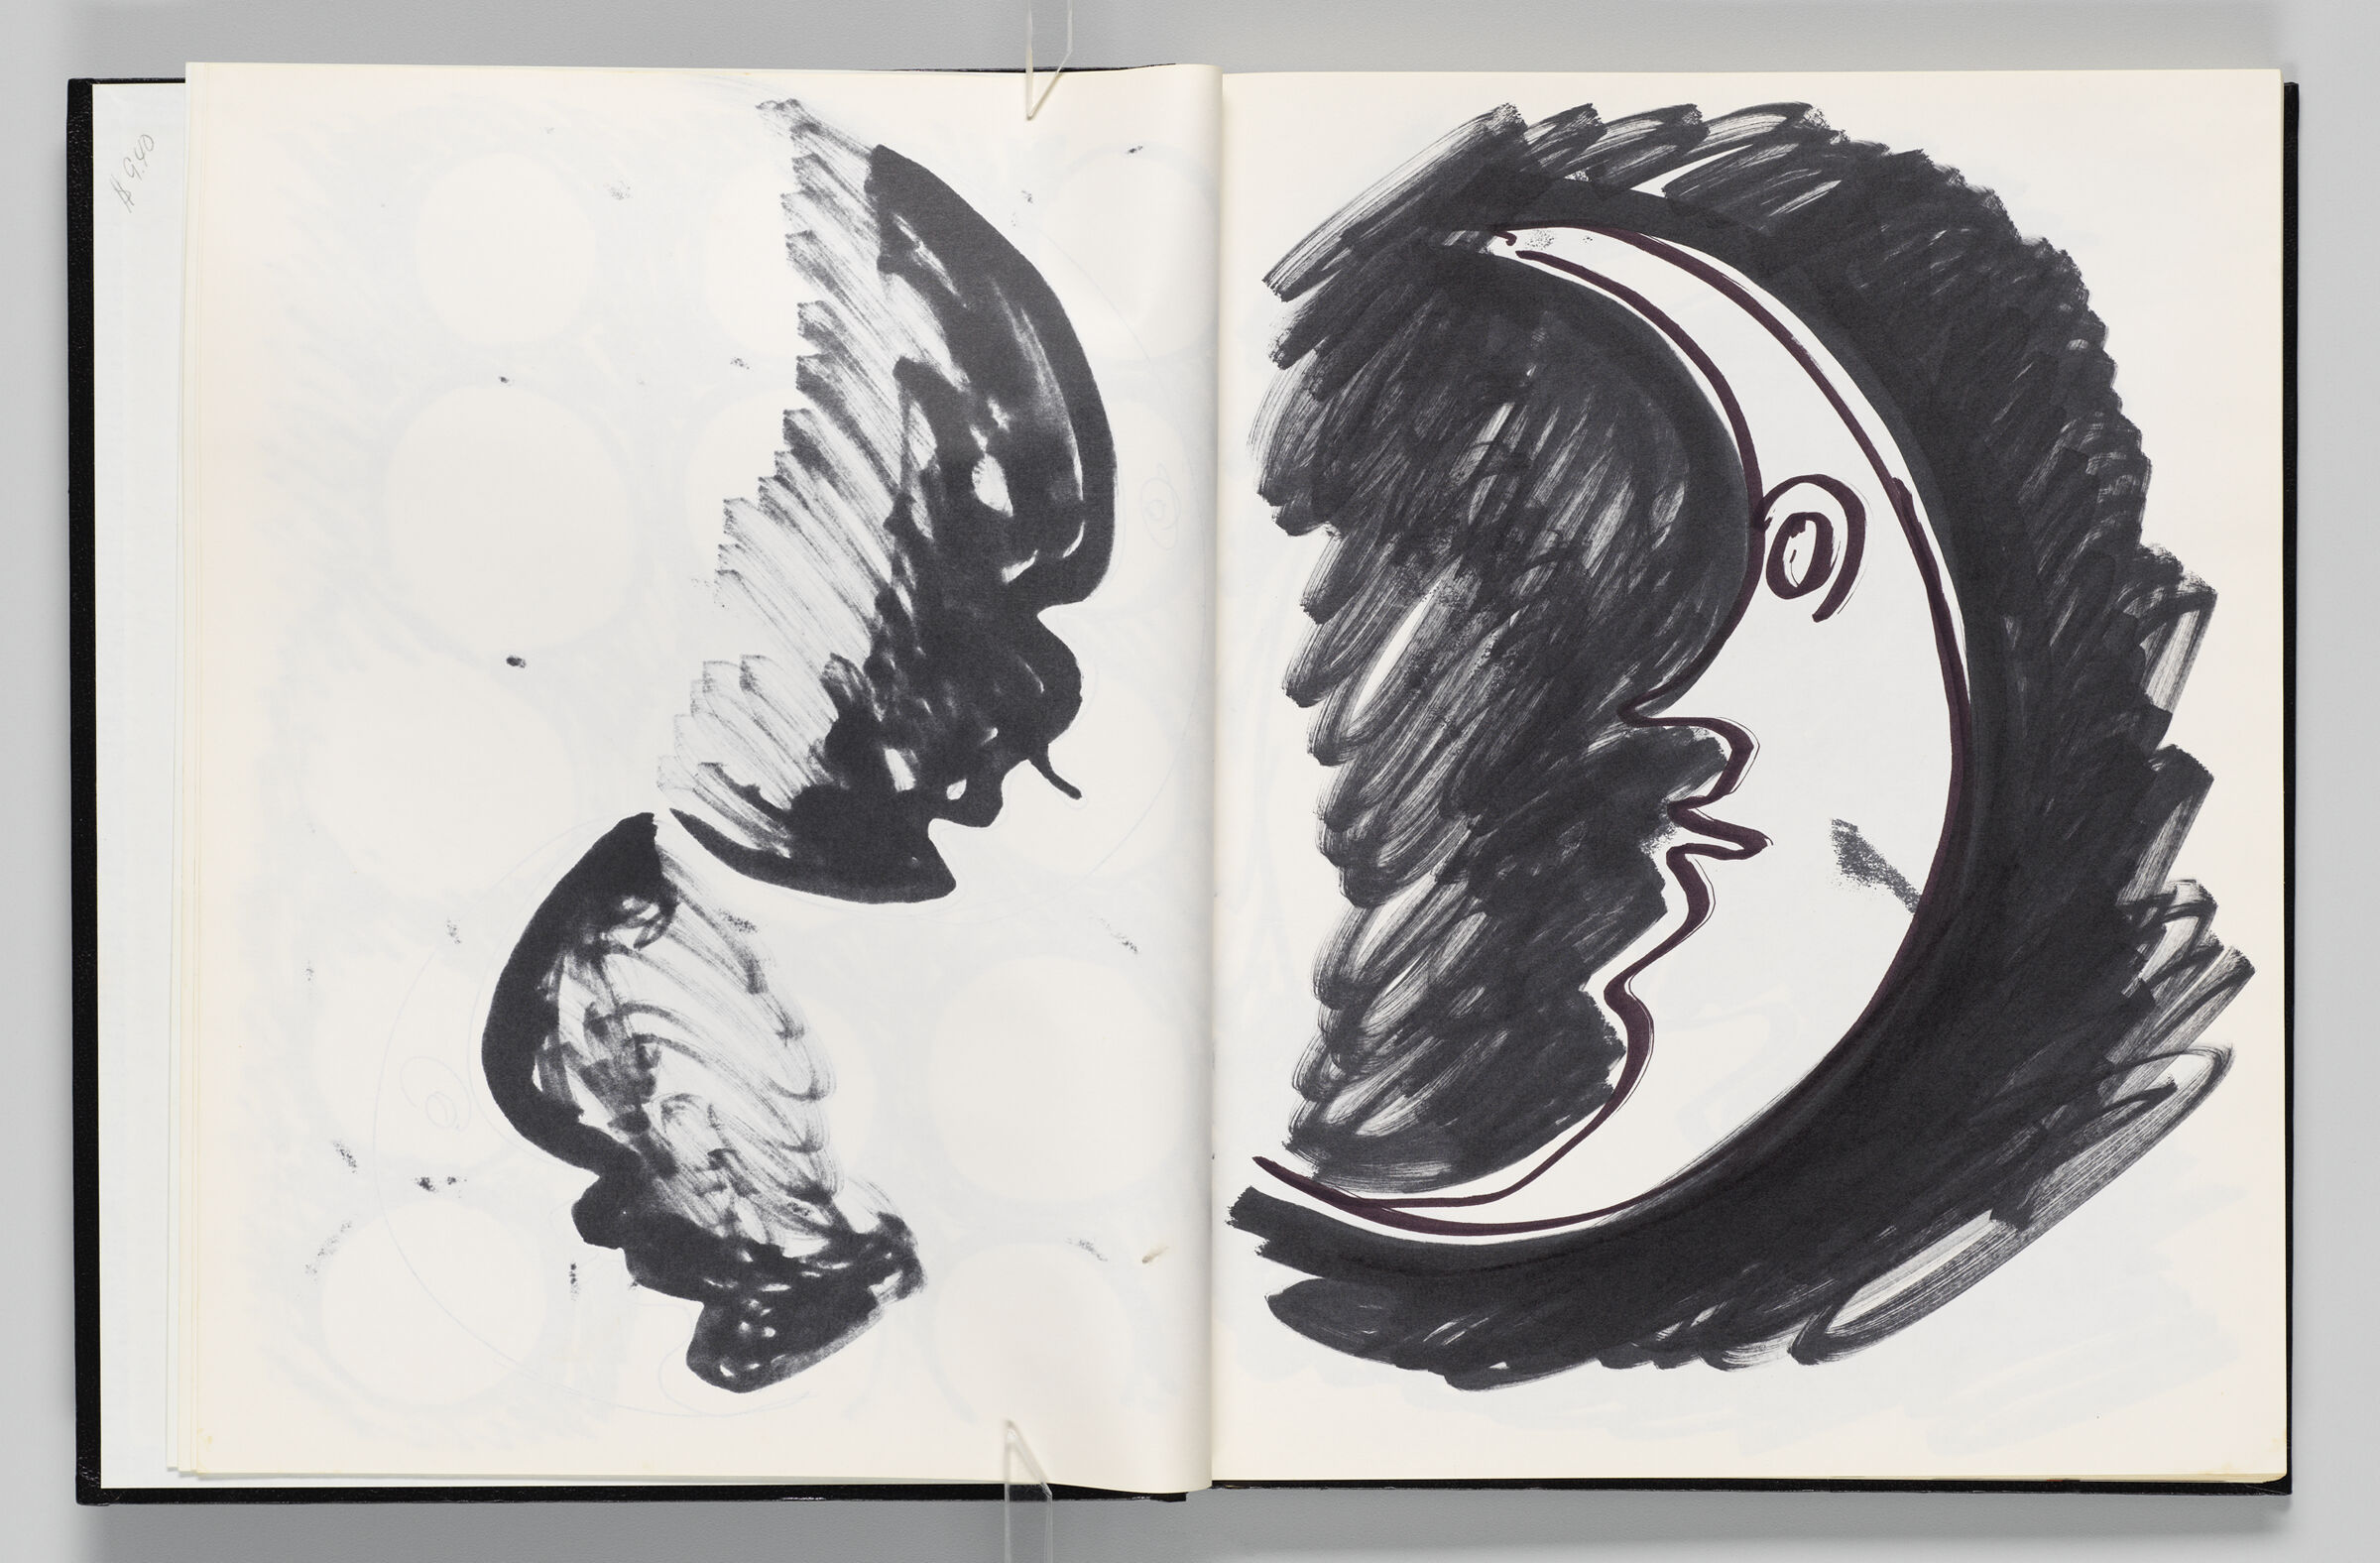 Untitled (Bleed-Through Of Previous Page, Left Page); Untitled (Crescent Moon Face, Right Page)